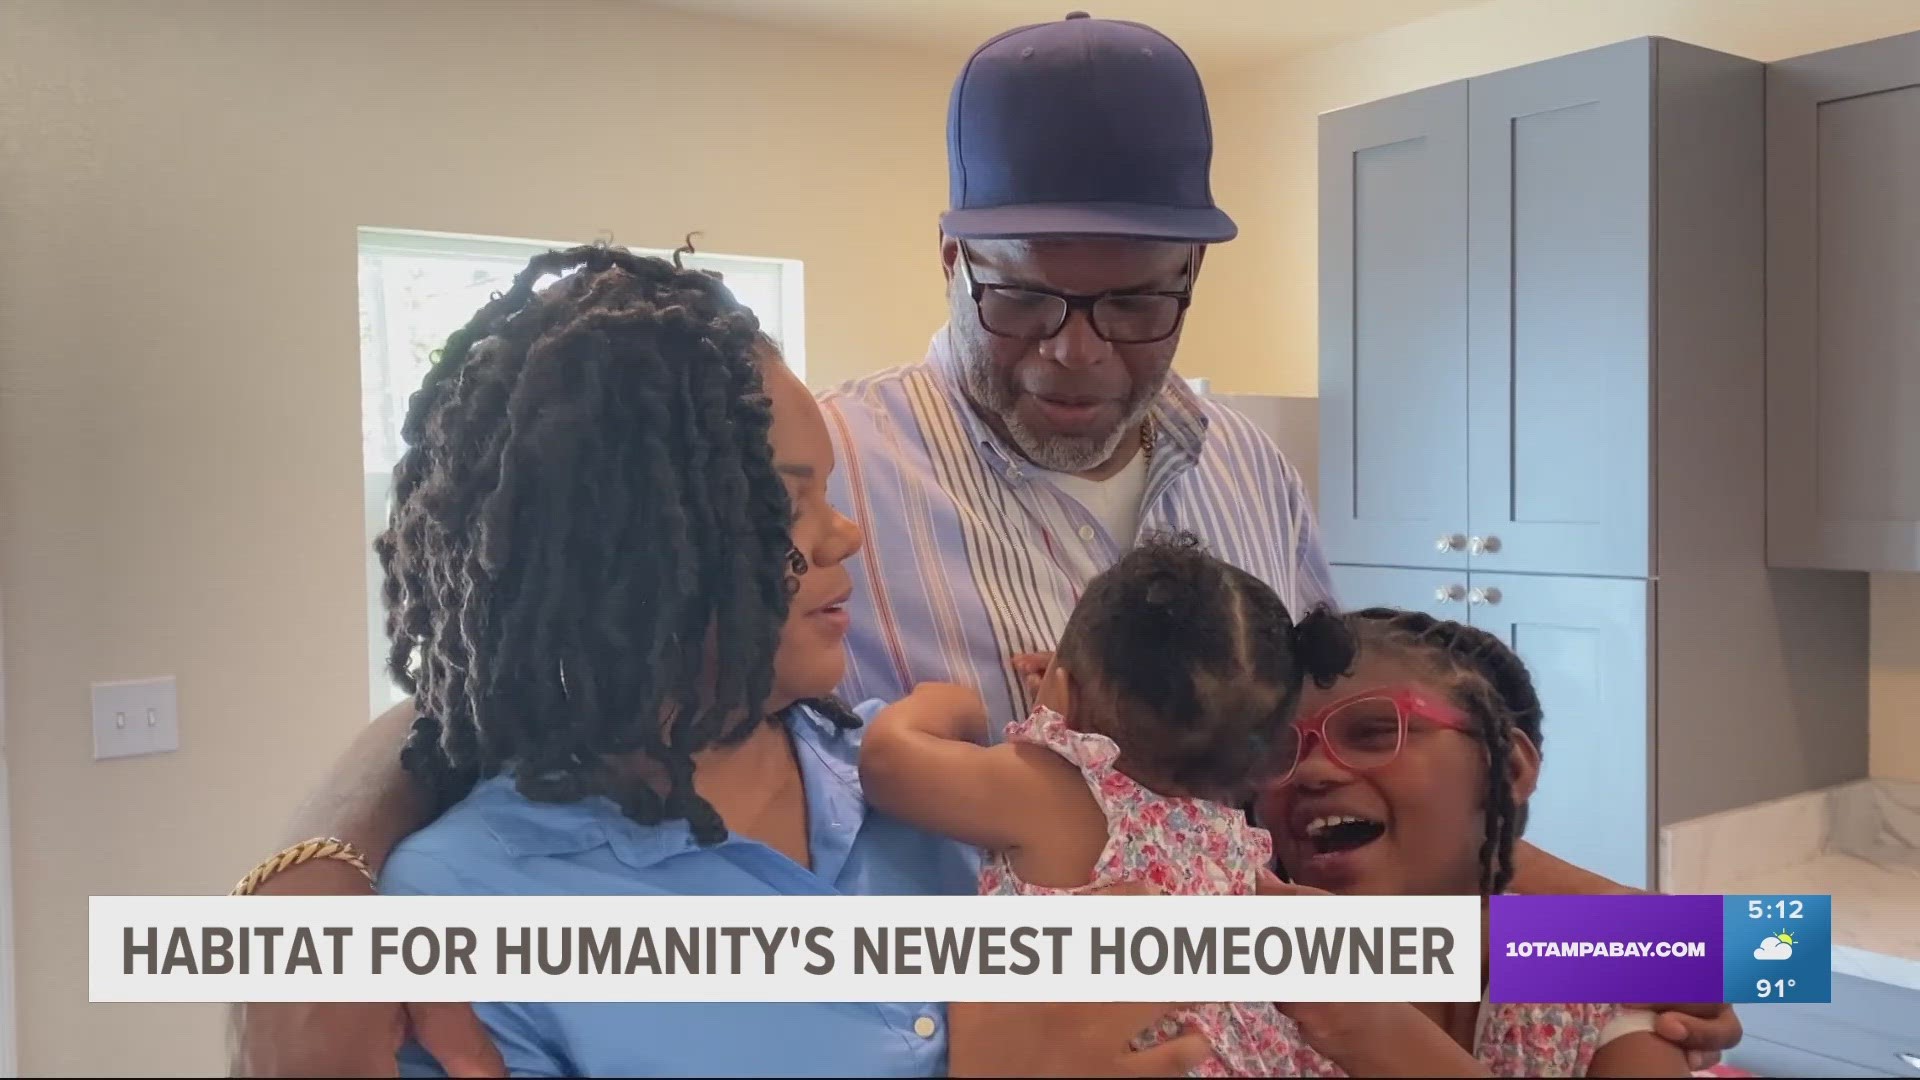 Habitat for Humanity works with contractors across the area to construct homes. One of those contractors got to see his daughter receive her house keys on Thursday.